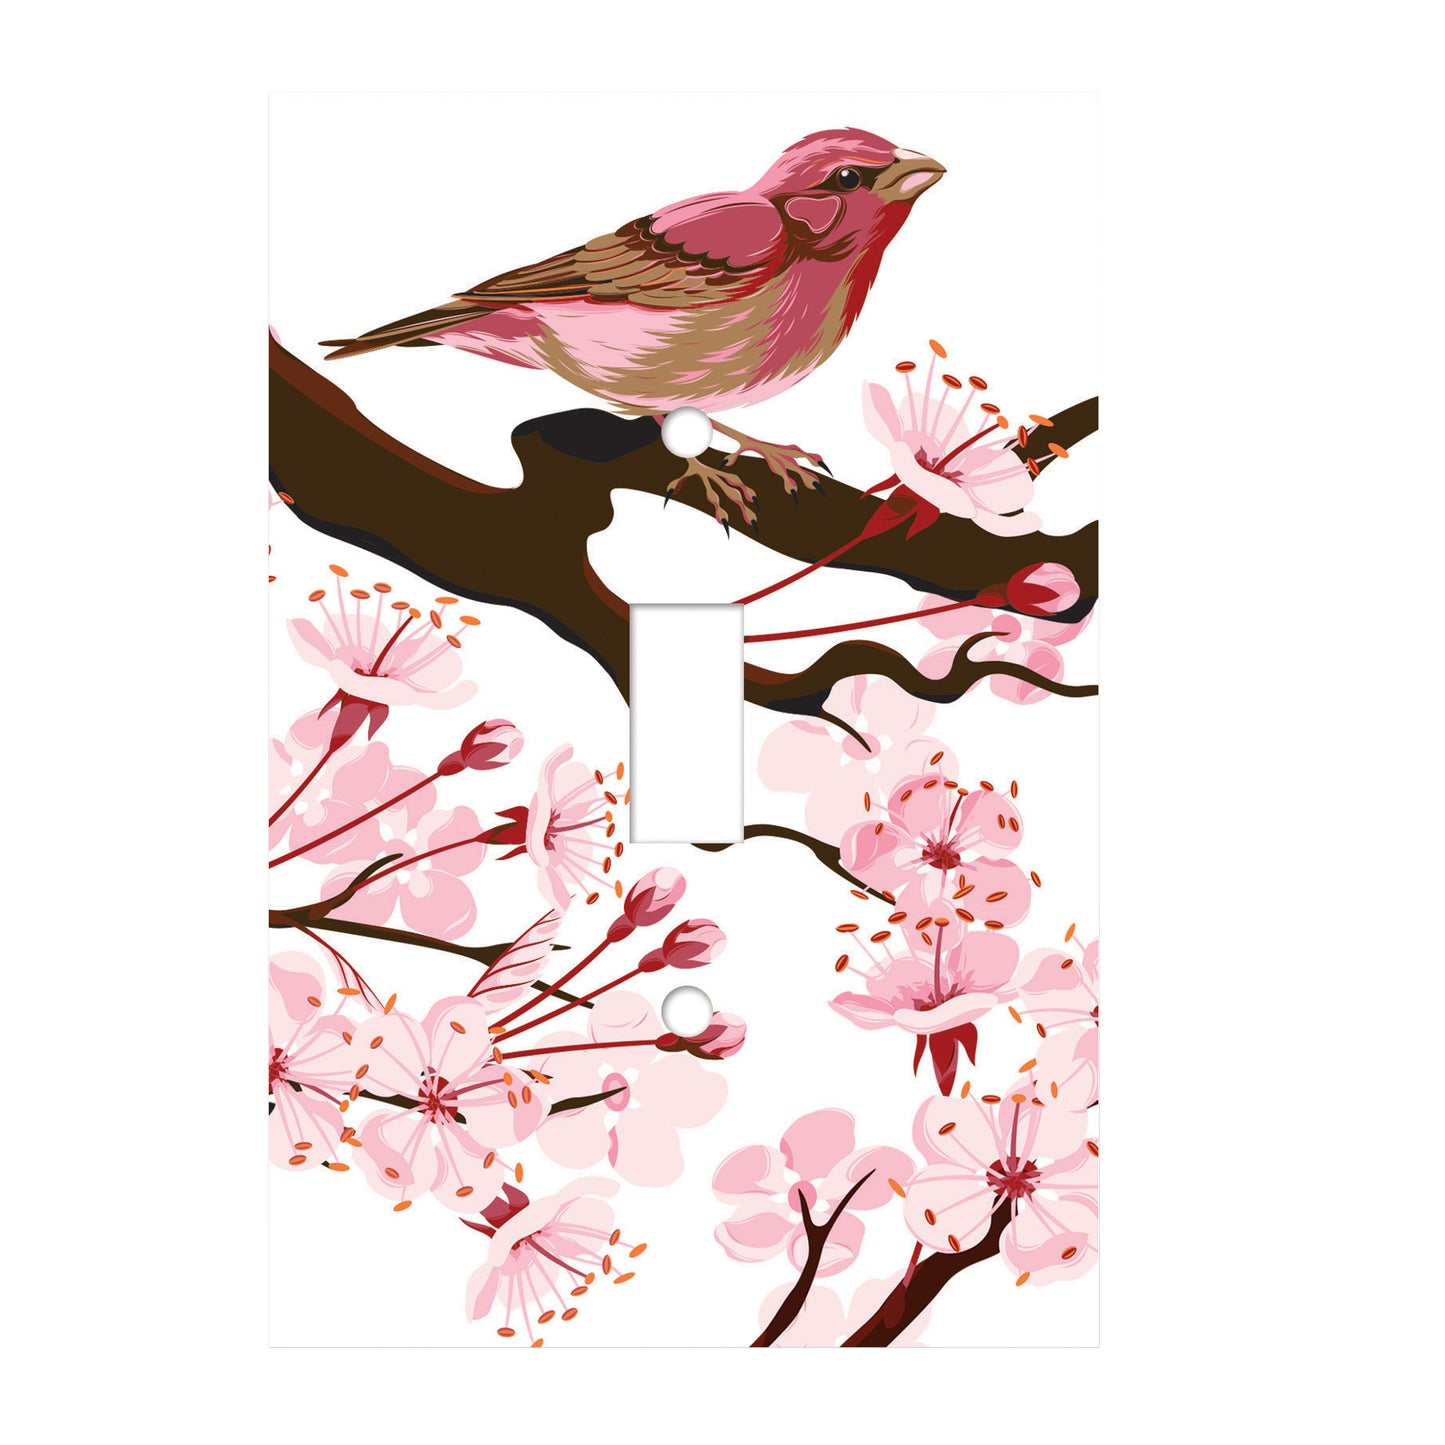 white ceramic single toggle switch plate featuring a finch sitting upon a tree branch with blossom flowers.